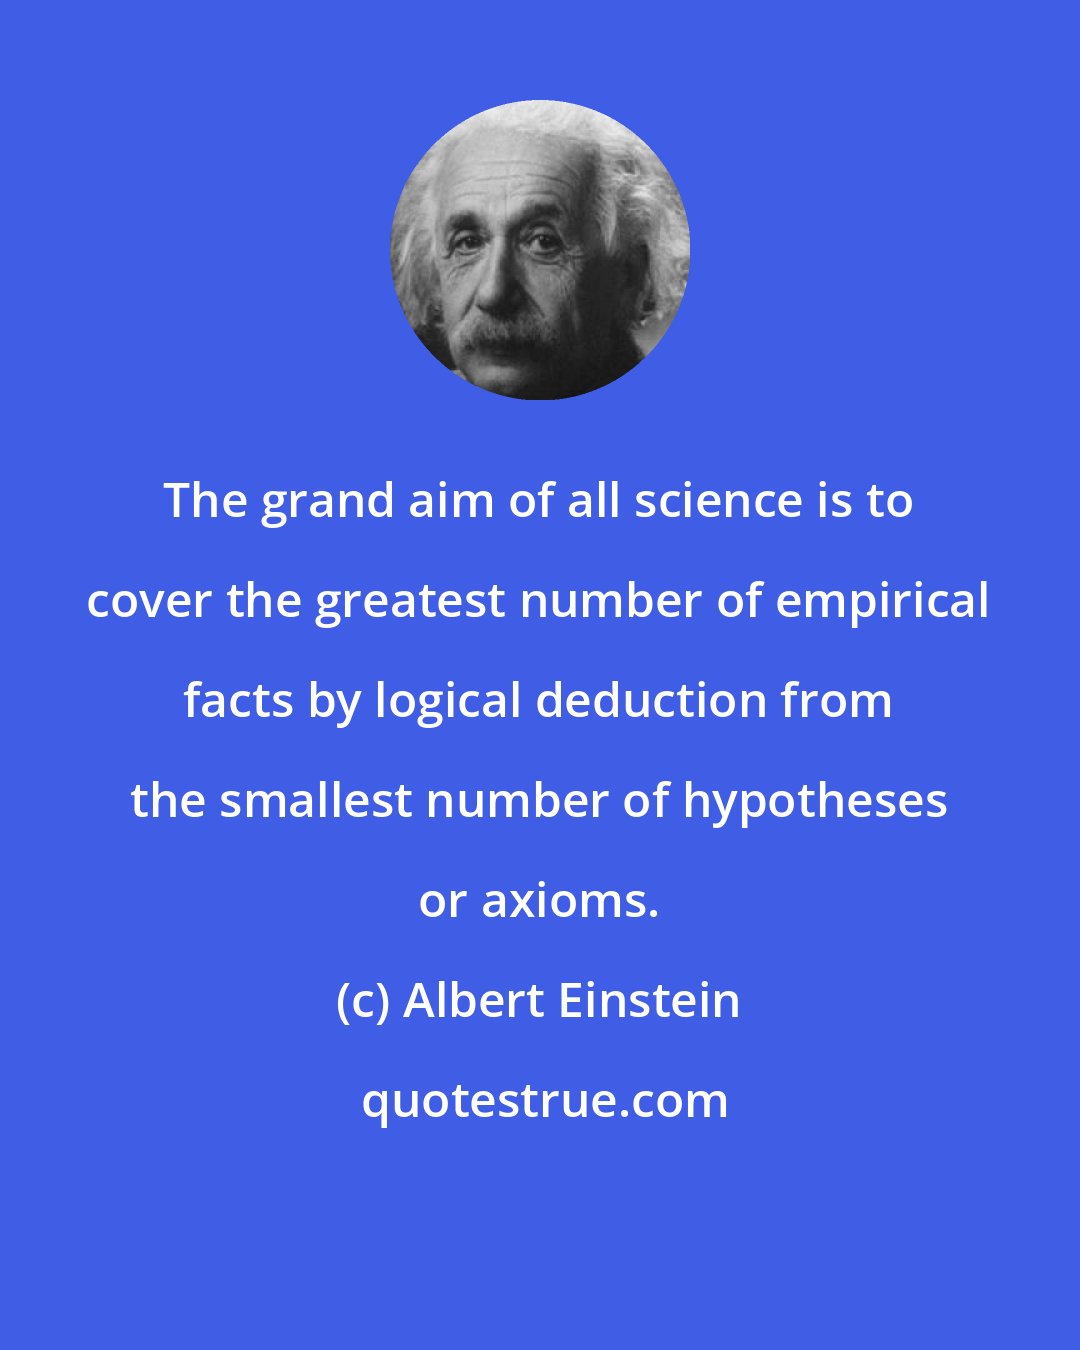 Albert Einstein: The grand aim of all science is to cover the greatest number of empirical facts by logical deduction from the smallest number of hypotheses or axioms.